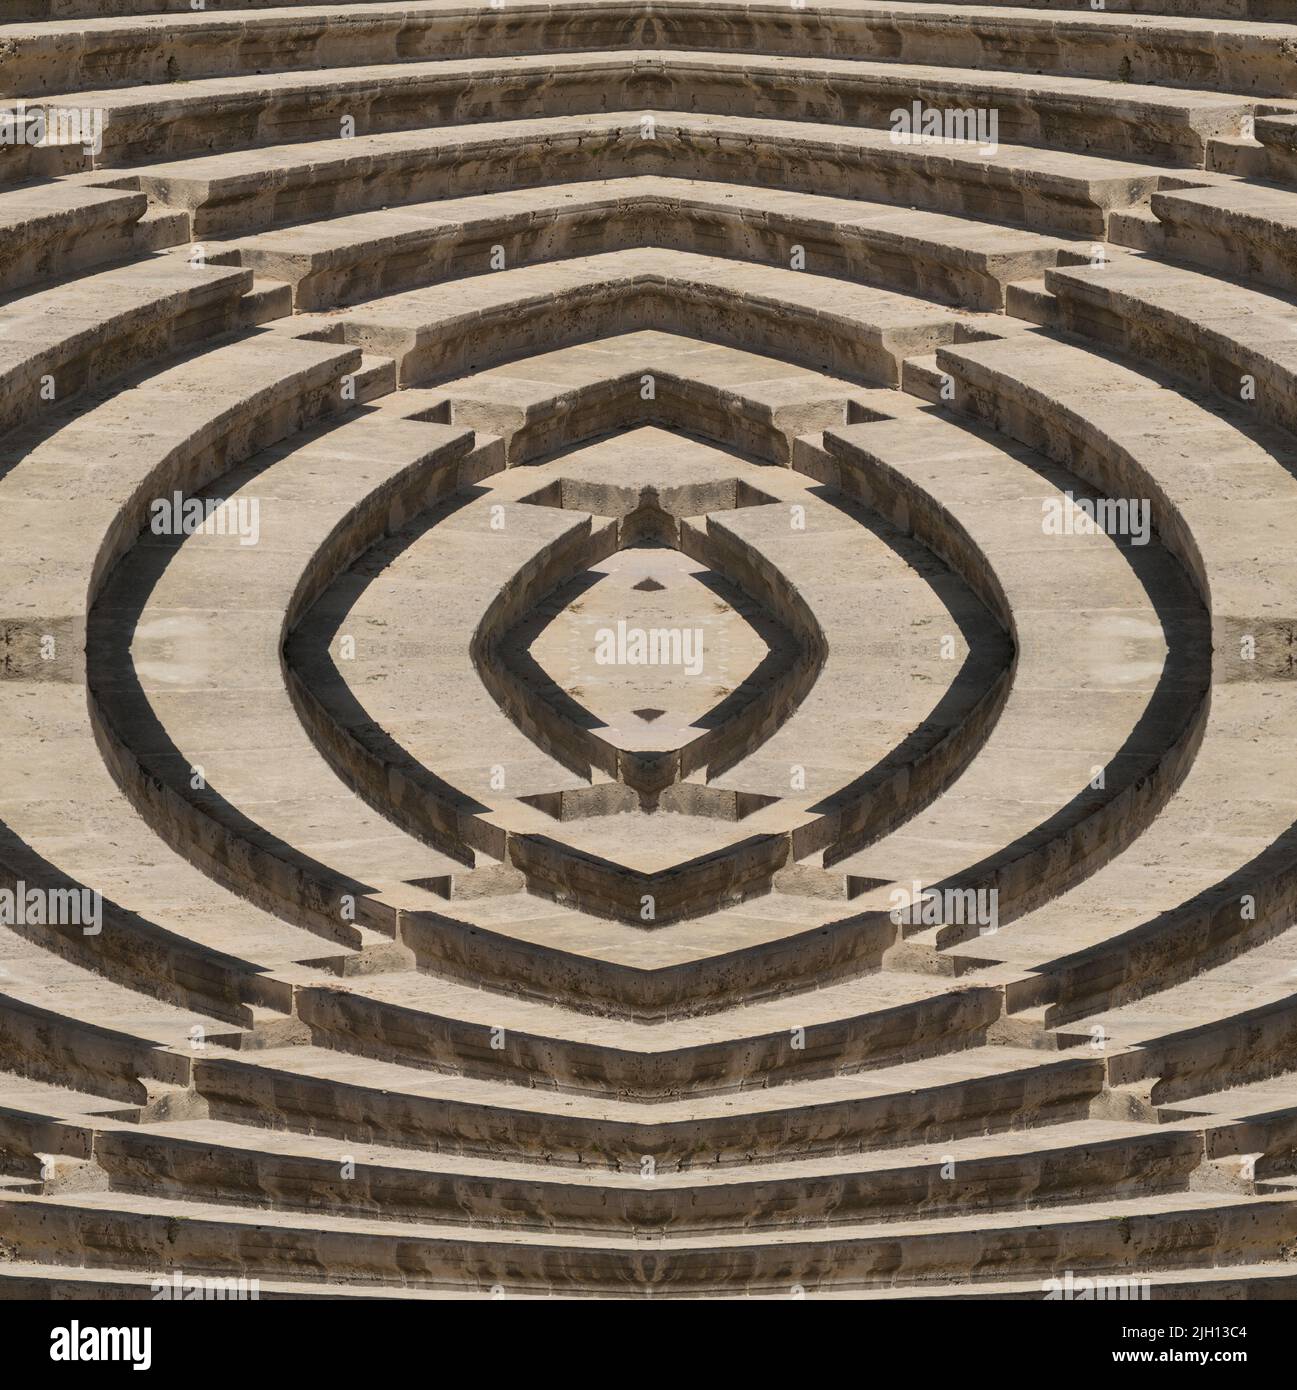 Abstract image of amphitheatre steps in Cyprus. Stock Photo